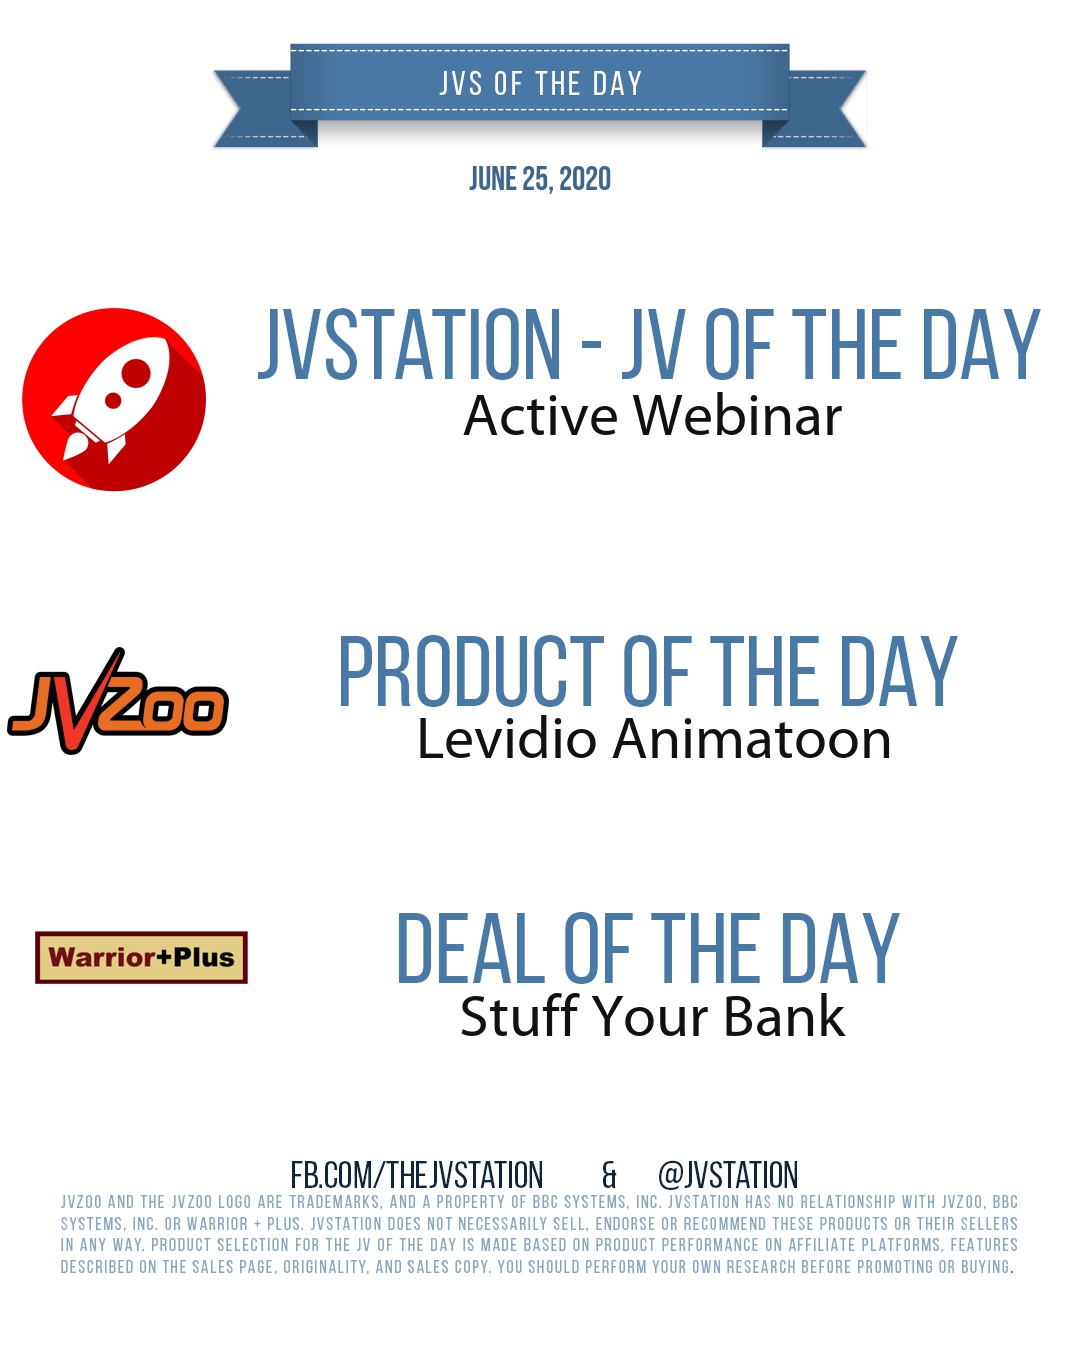 JVs of the day - June 25, 2020